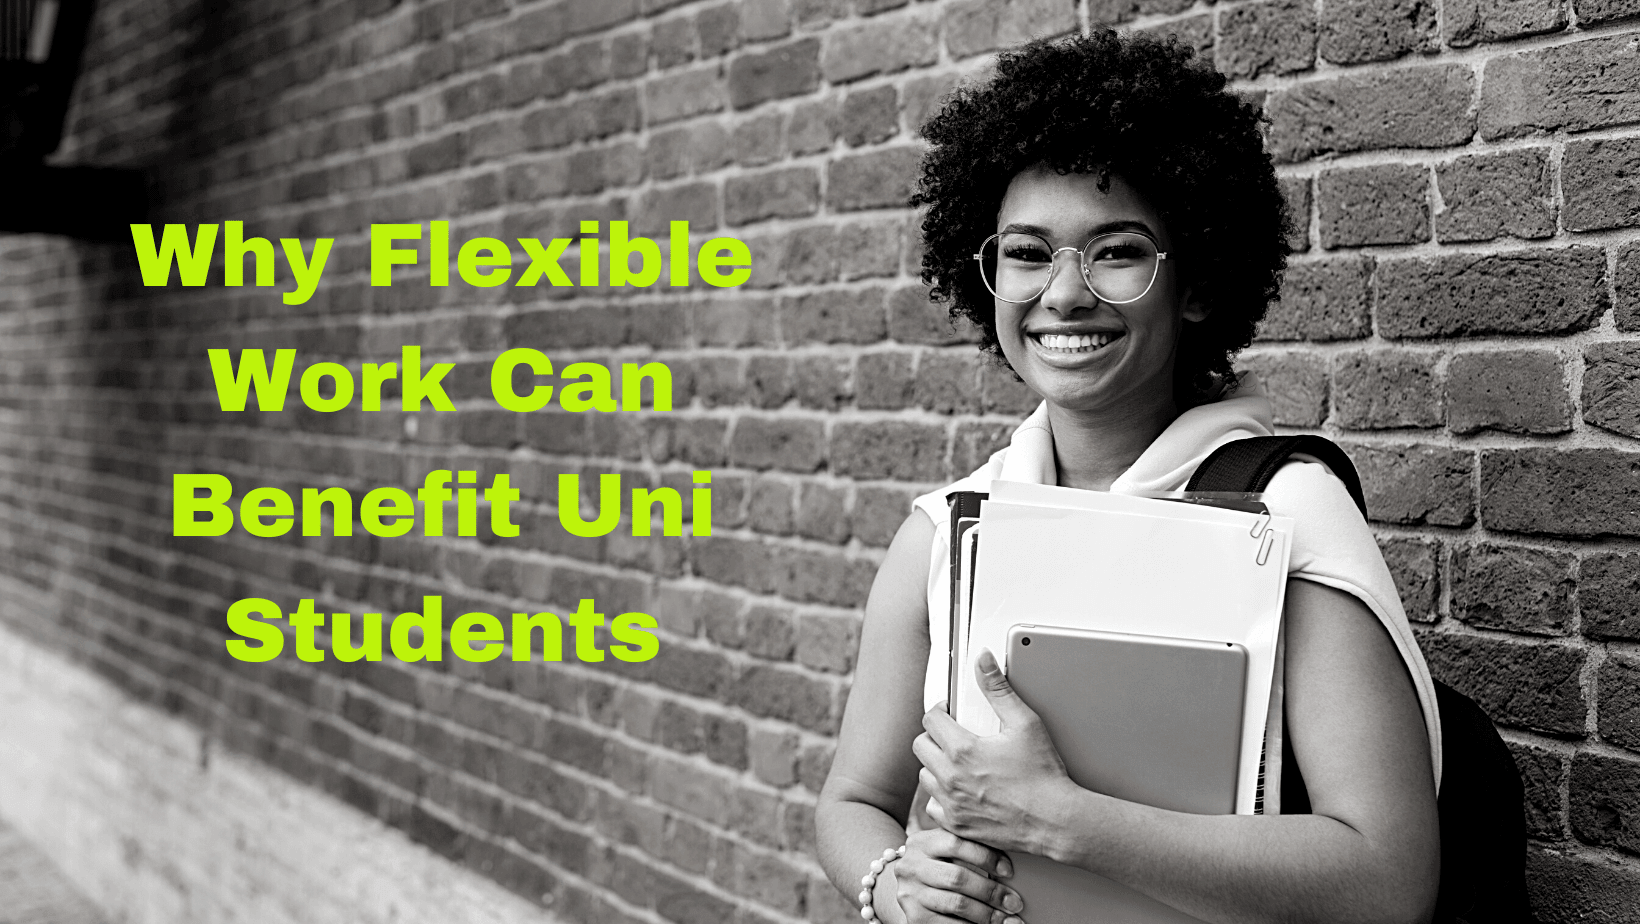 Image for Why Flexible Work Can Benefit Uni Students